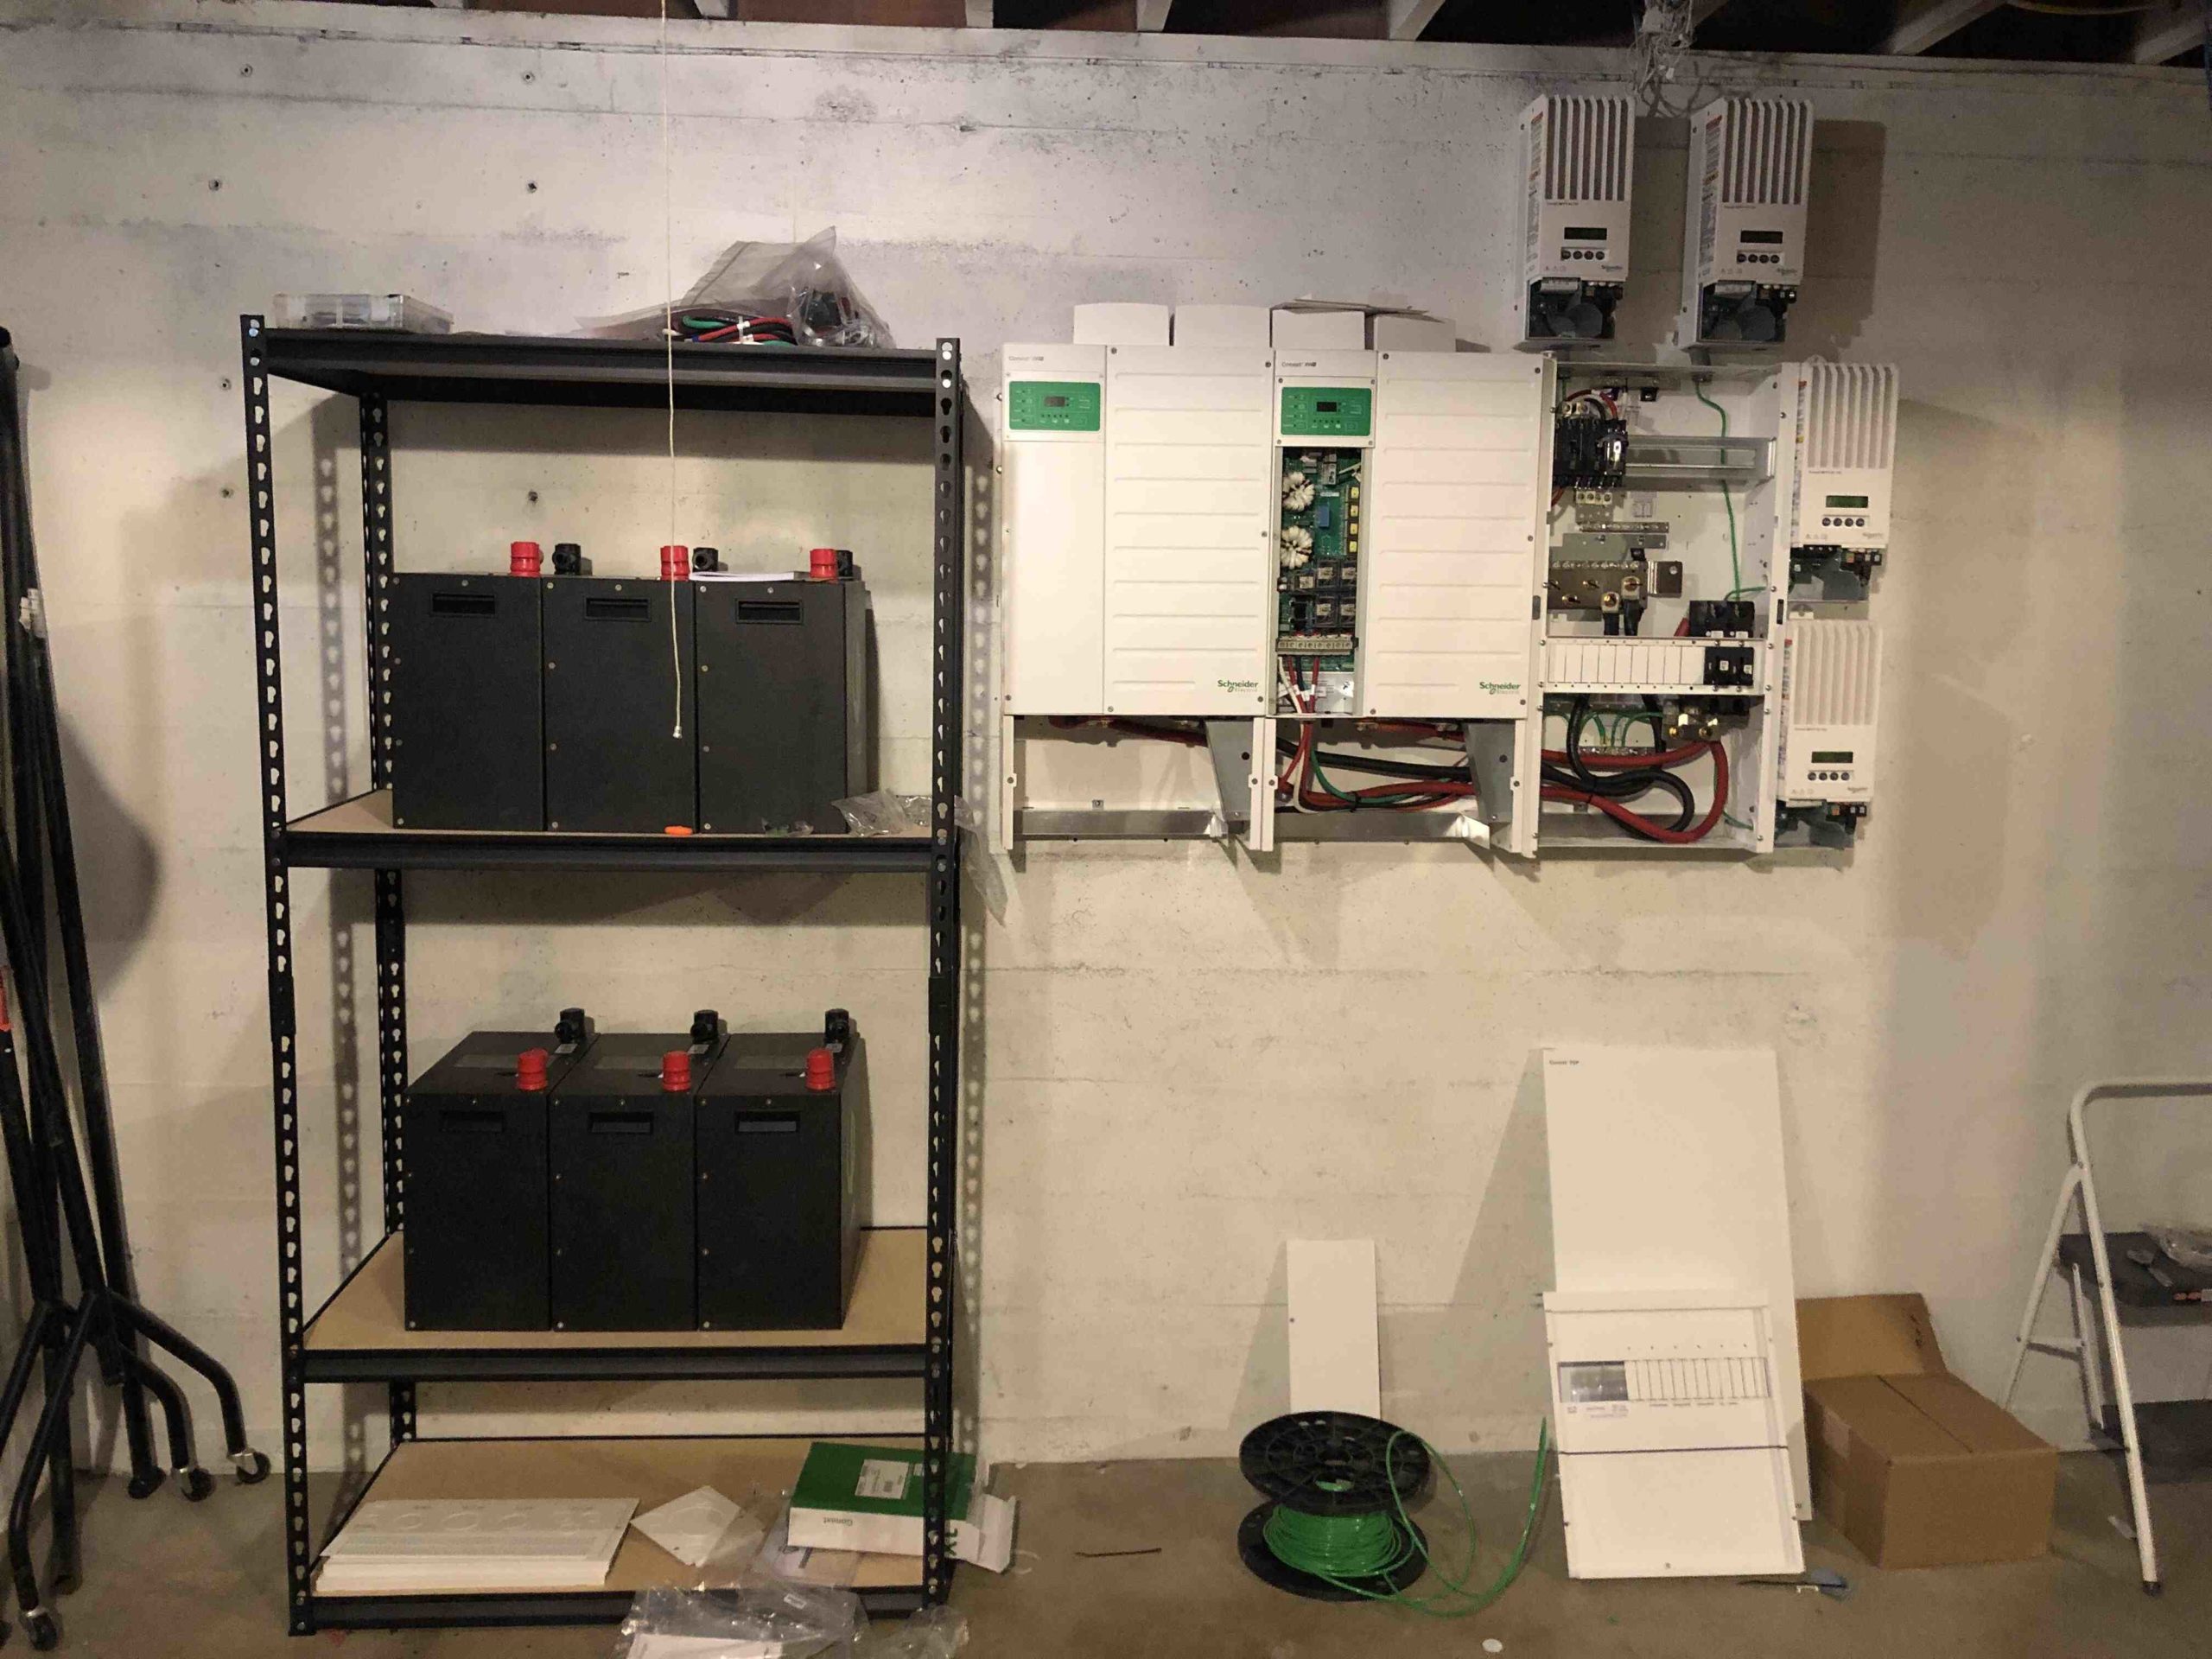 How much does it cost to have inverter install?